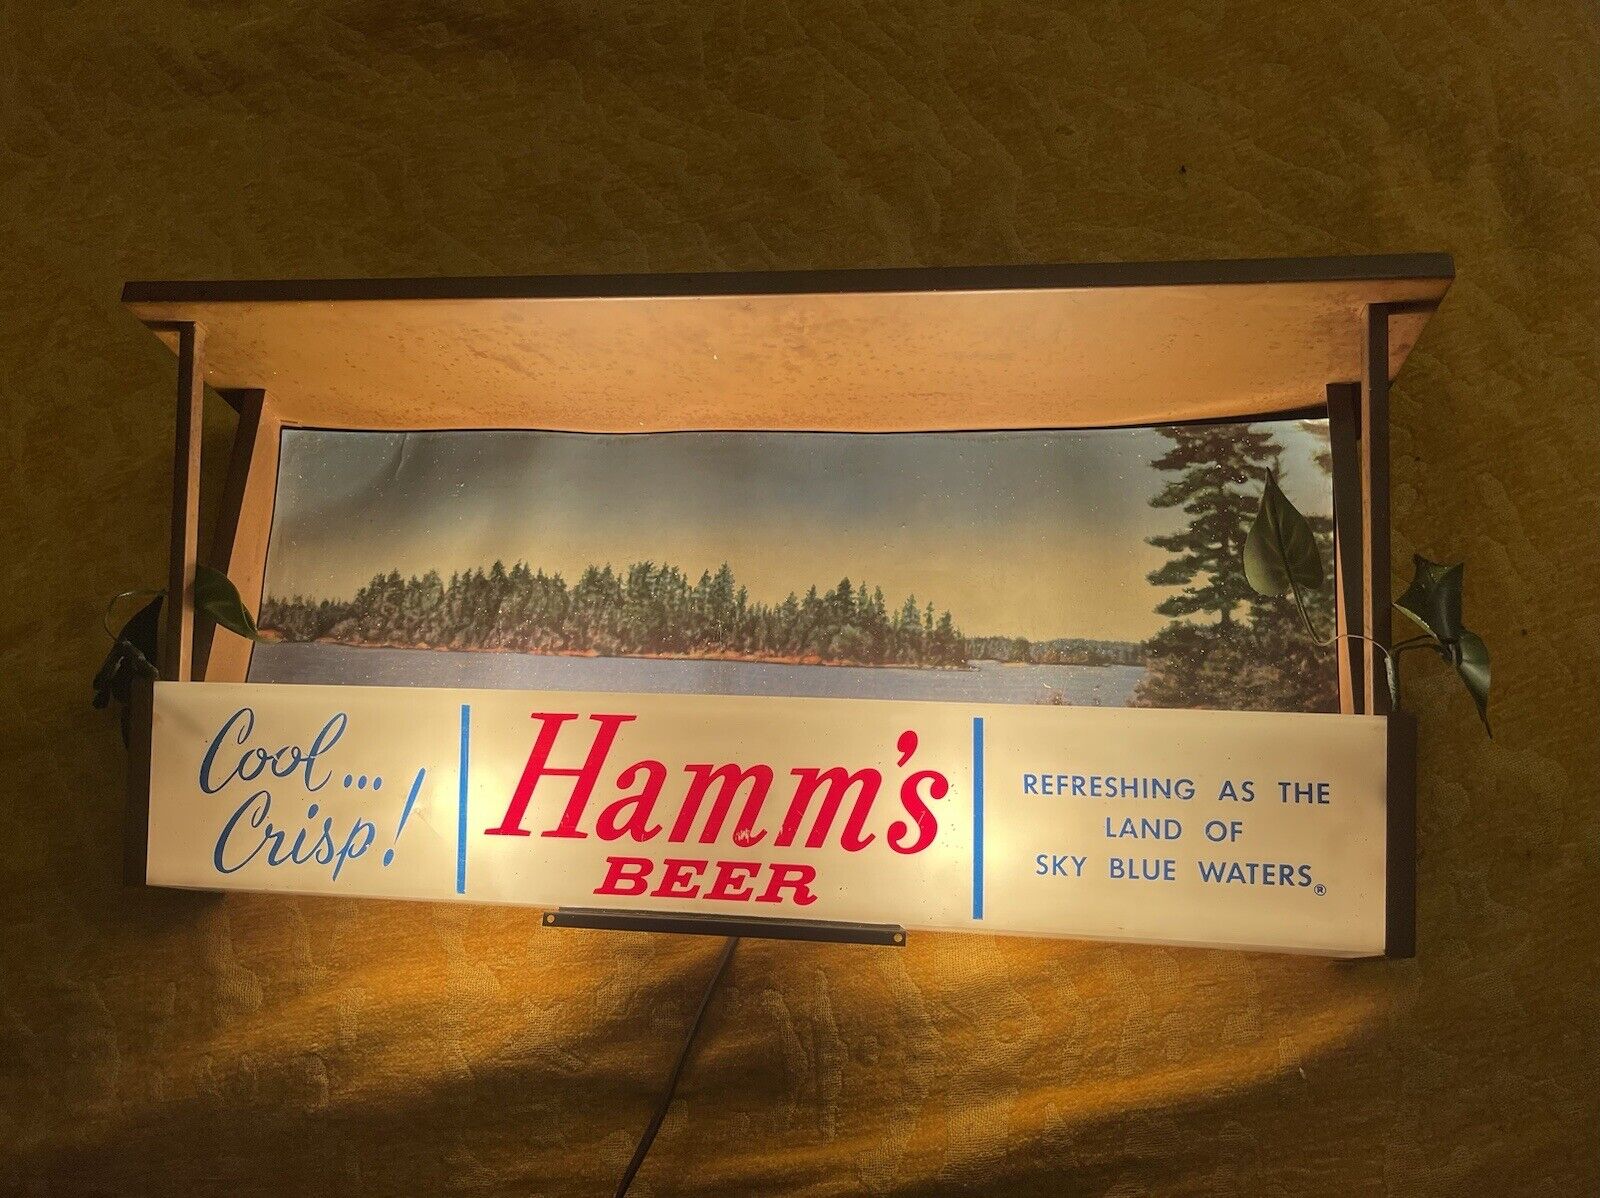 Rare Vintage Hamm’s Beer Sign - Cool Crisp - Lighted Fathers, Mancave, Scenic